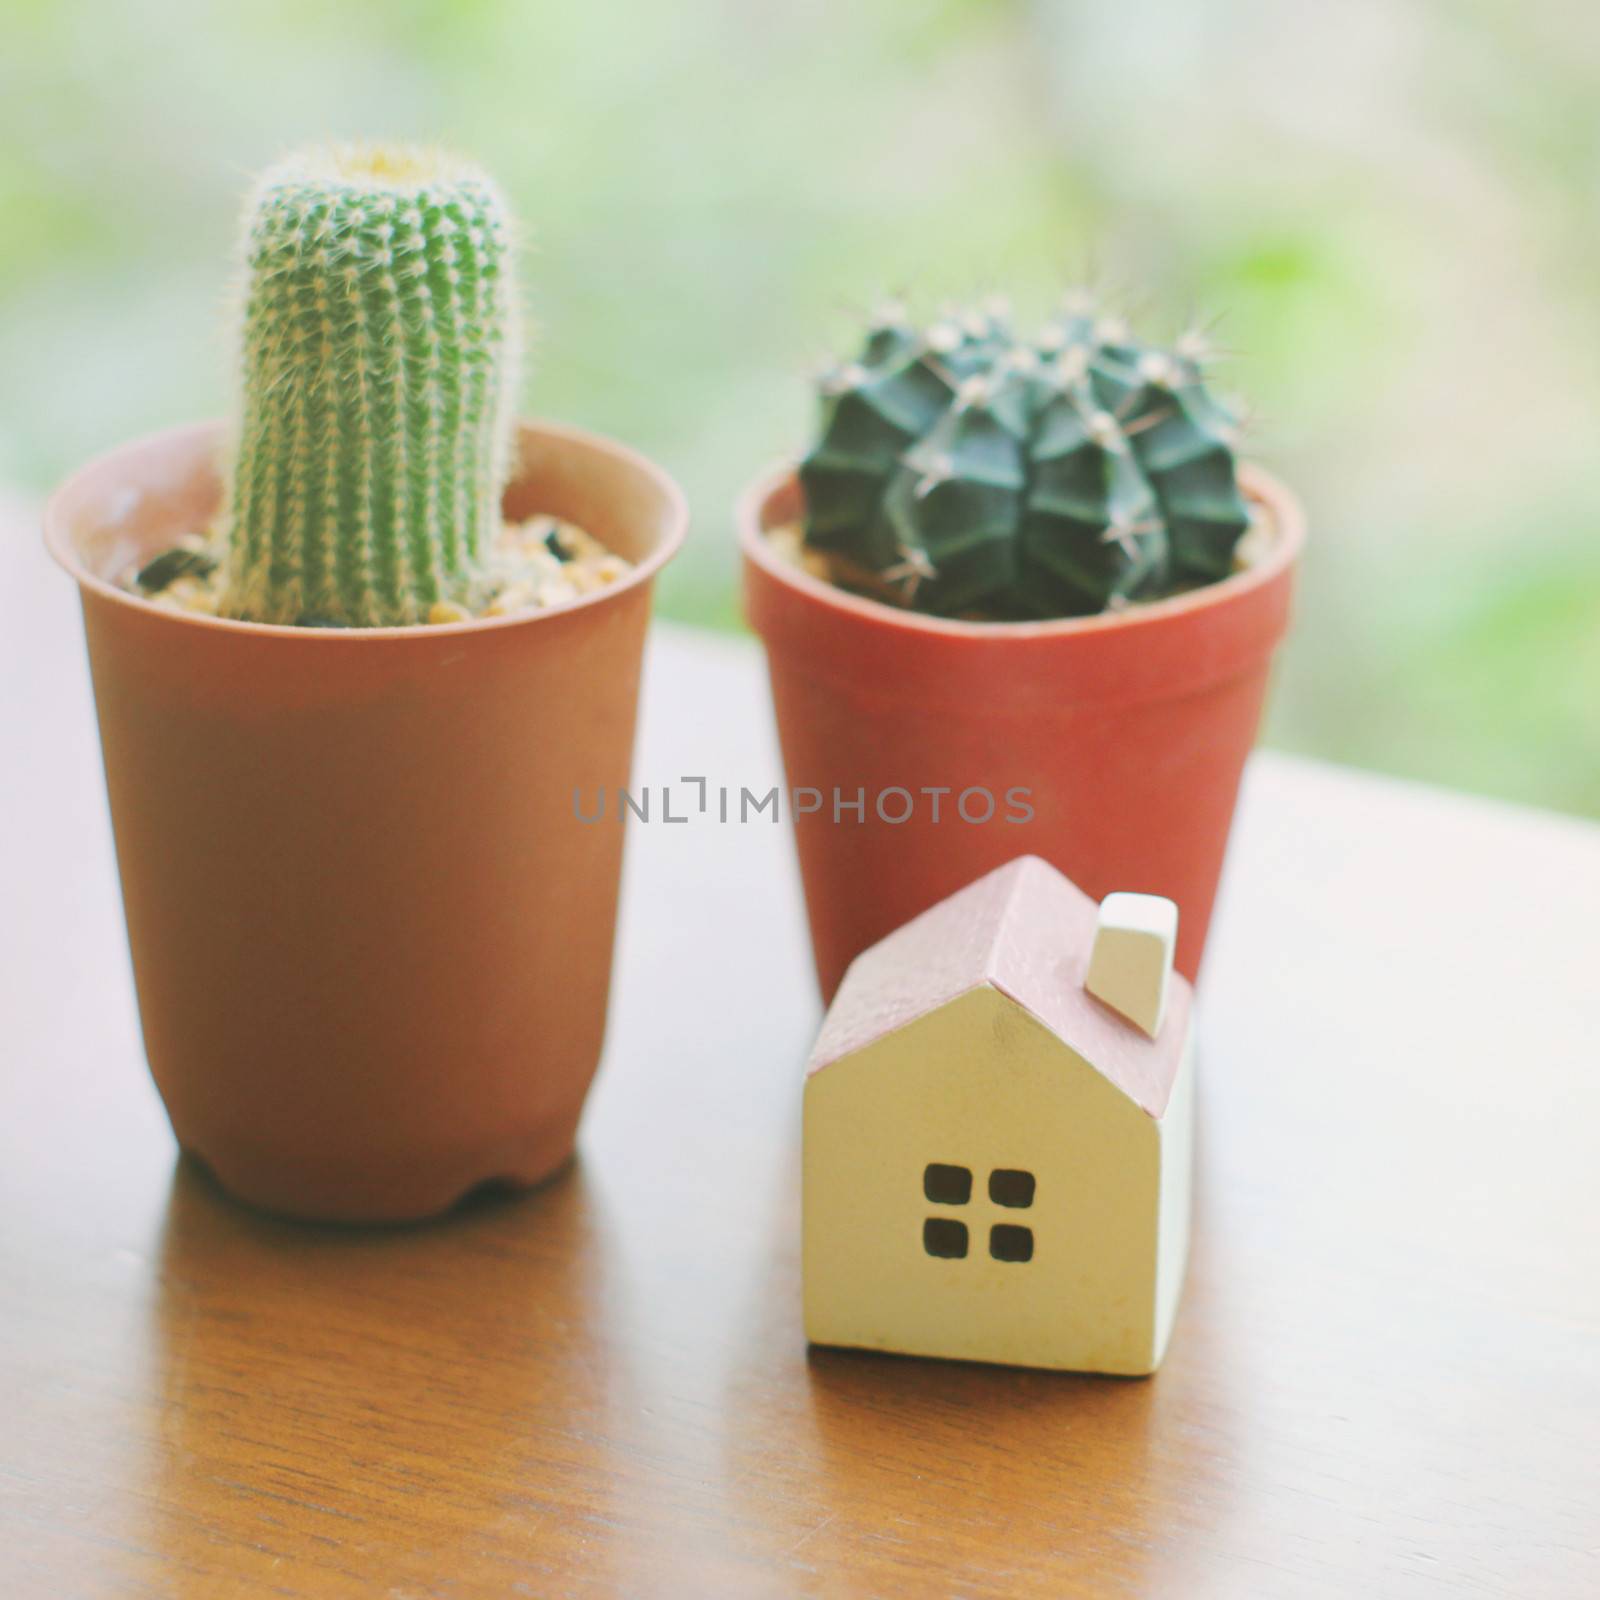 Cactus with small house for decorated, retro filter effect